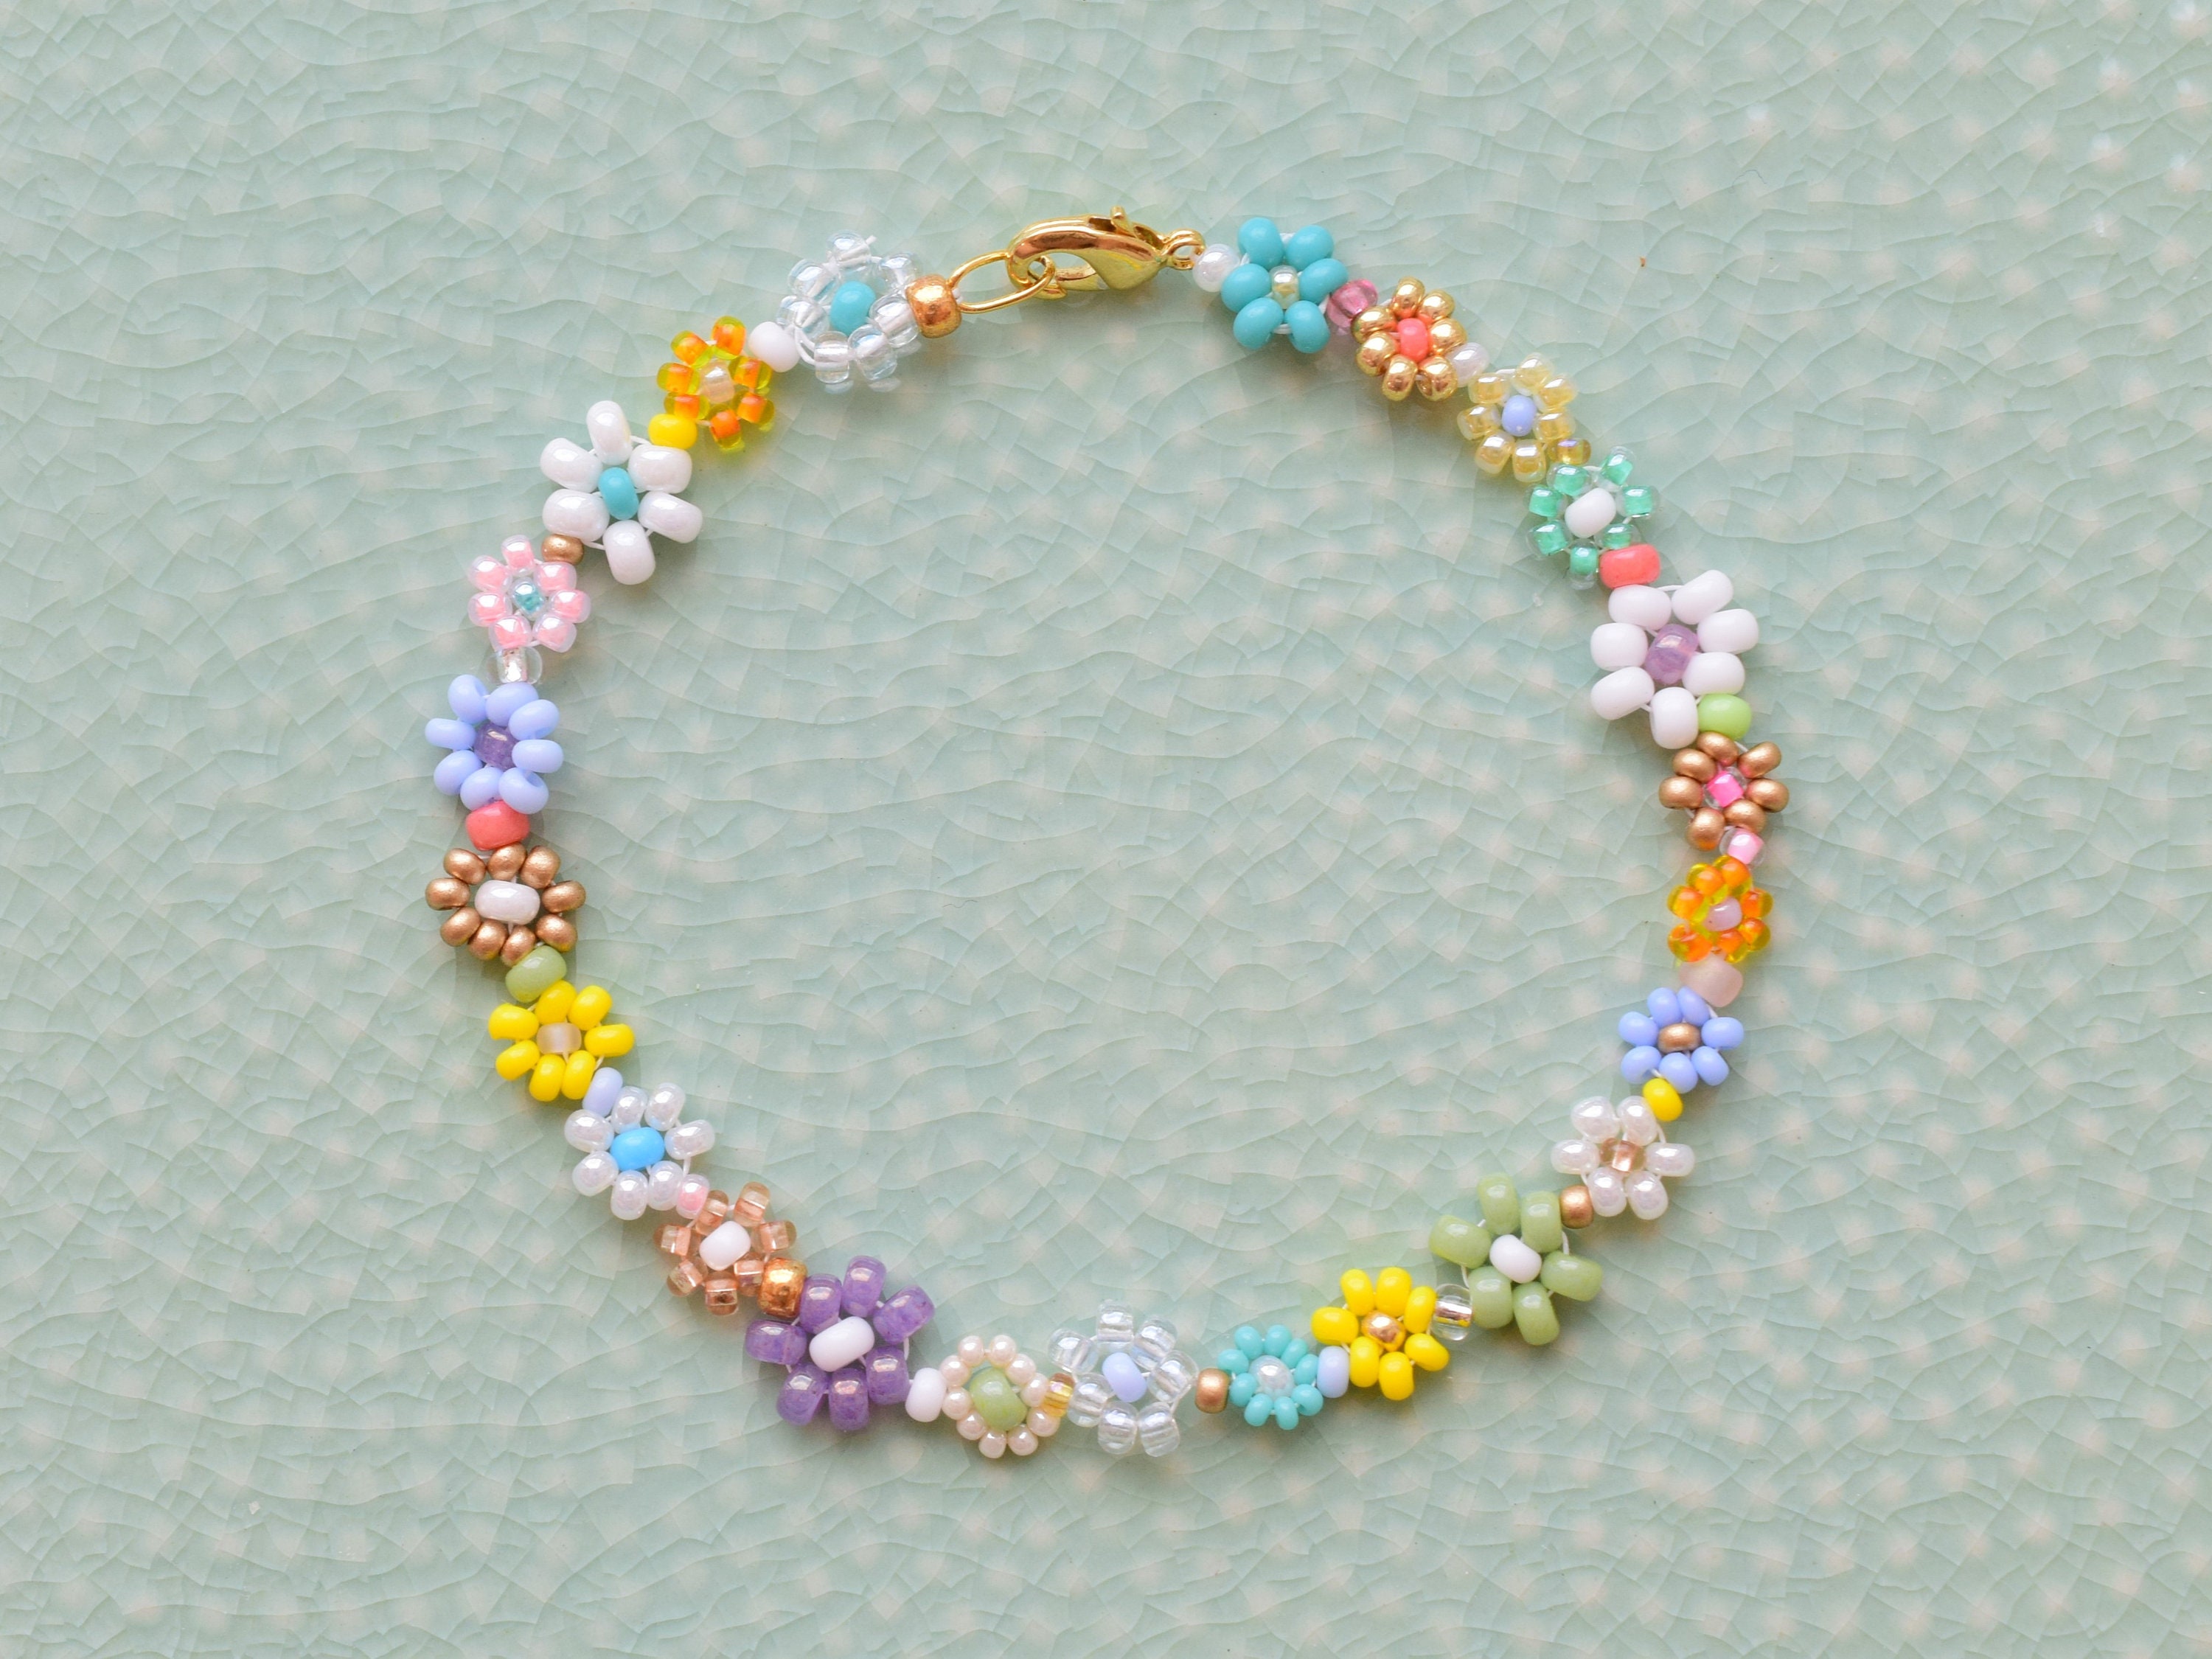 Bead and Chain Bracelets - Happy Hour Projects